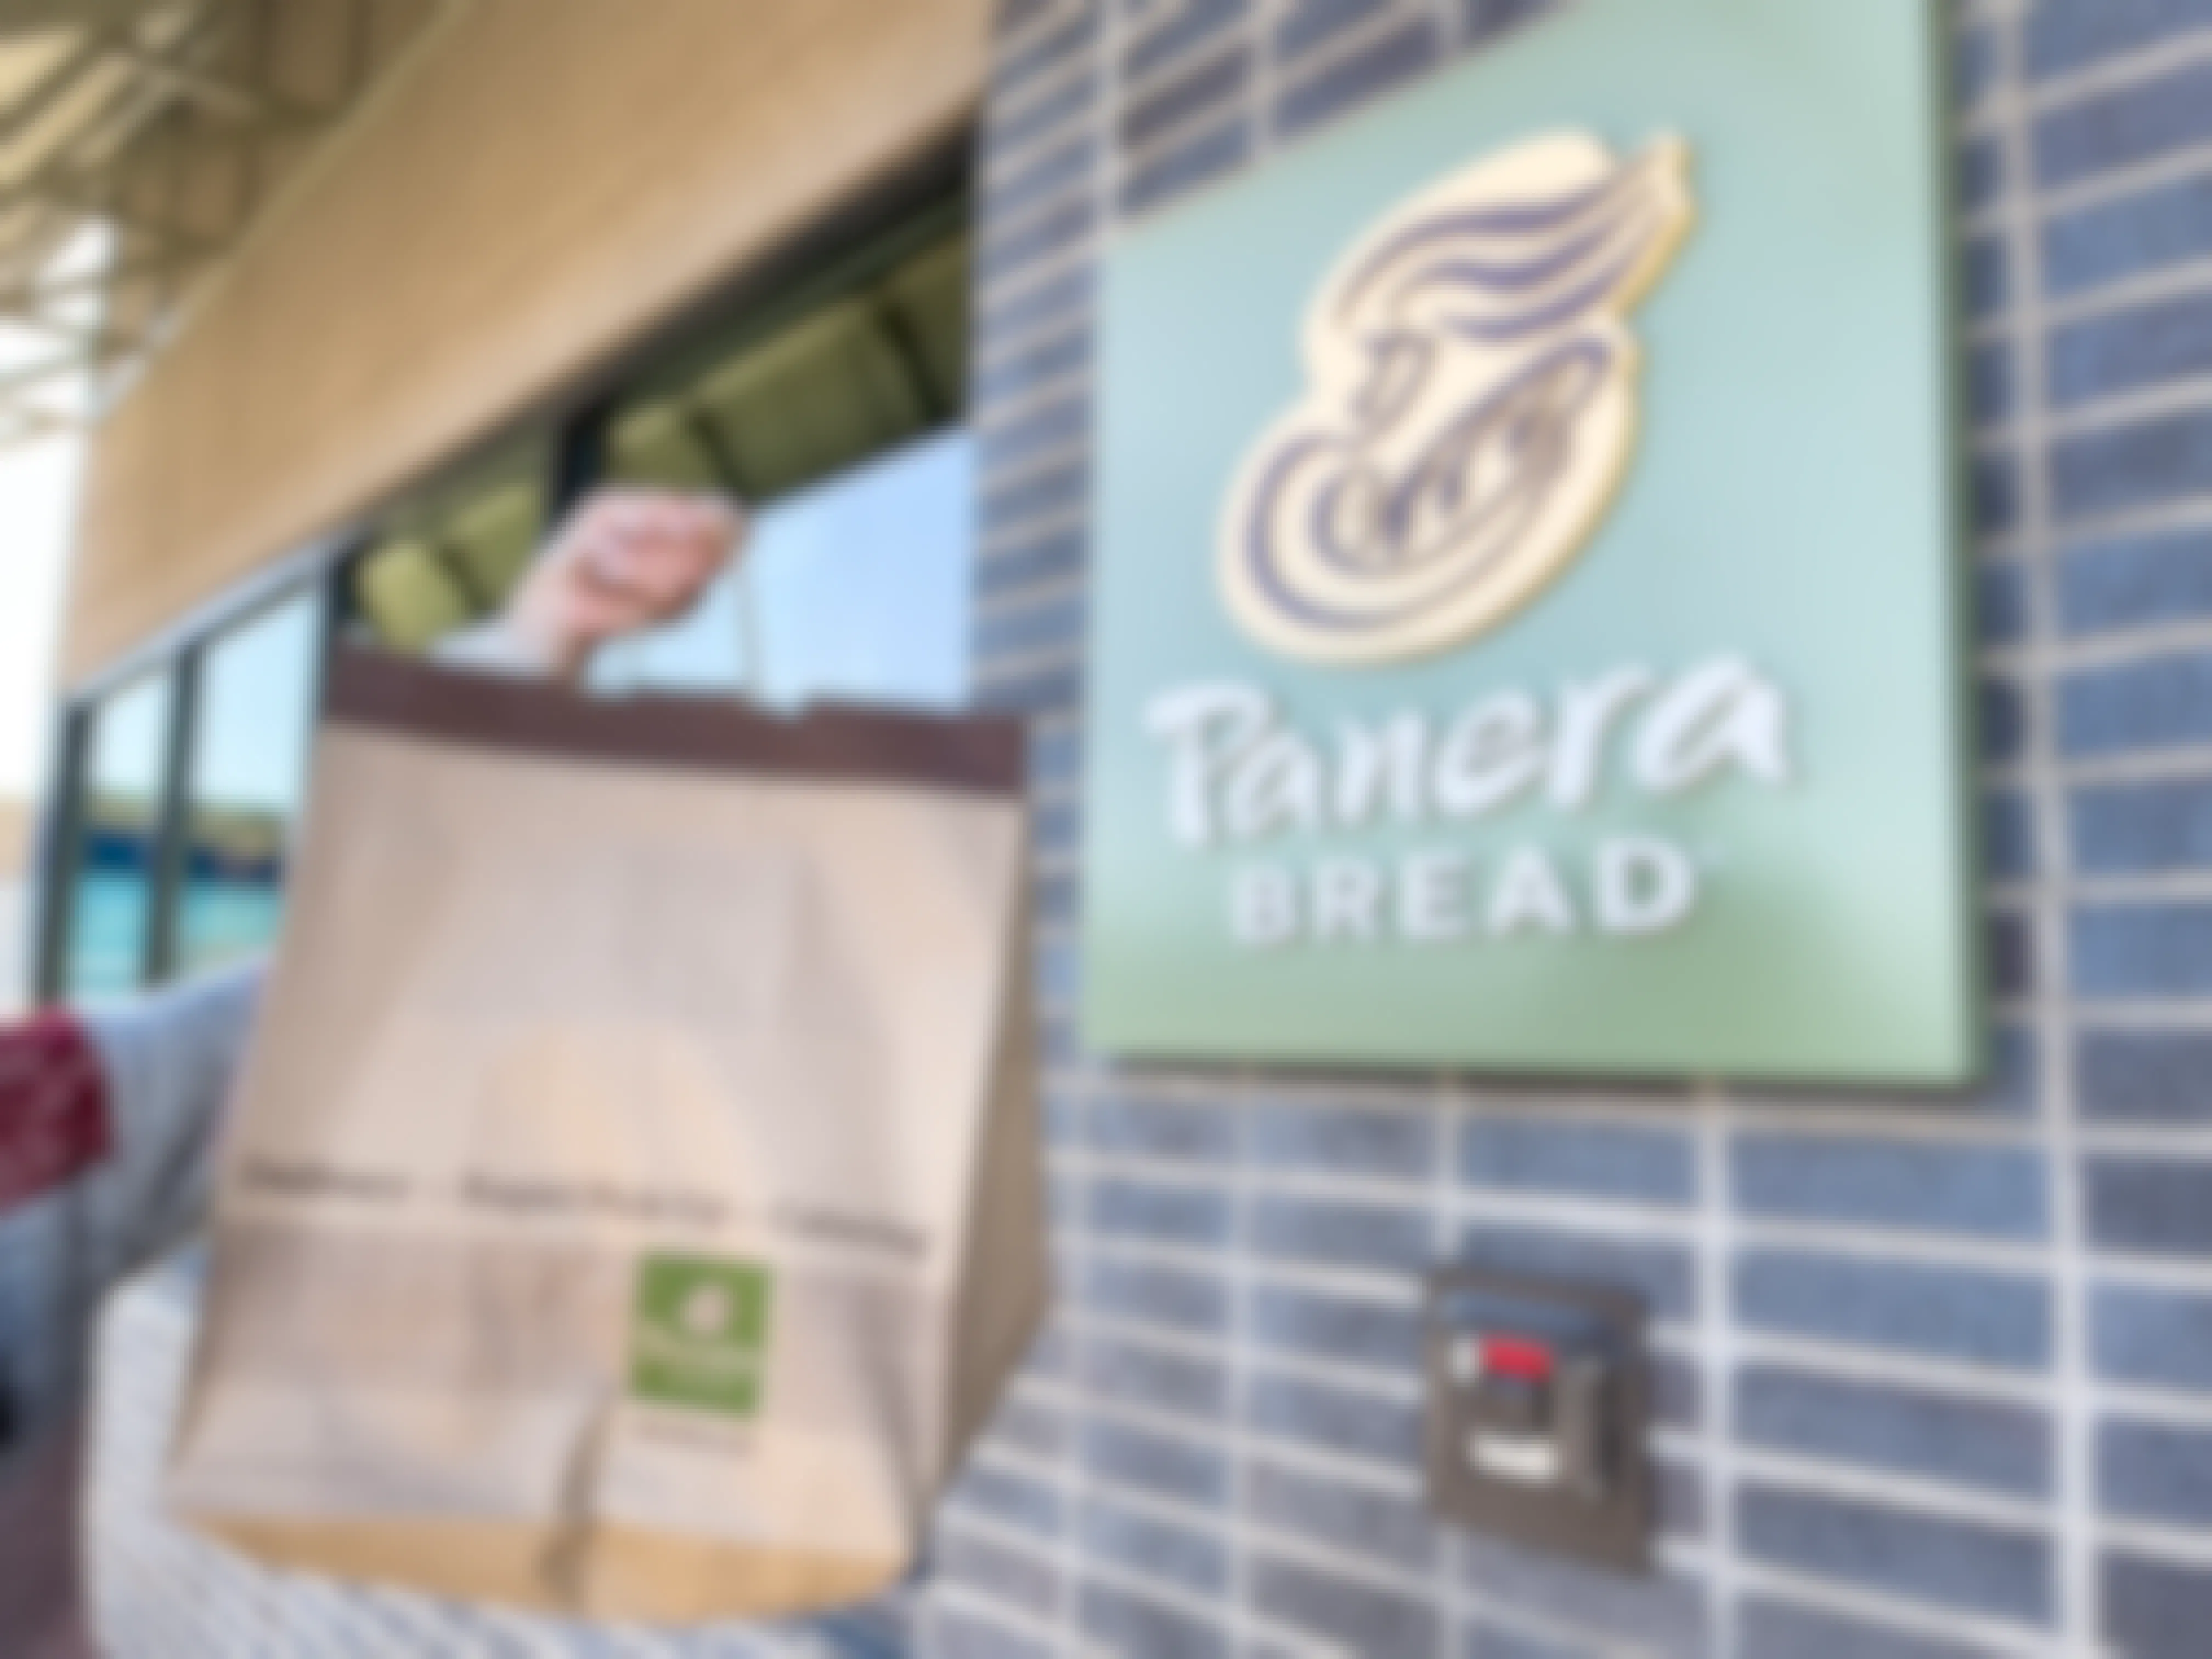 Craving Panera Bread? Amazon Alexa Can Order Delivery in Minutes